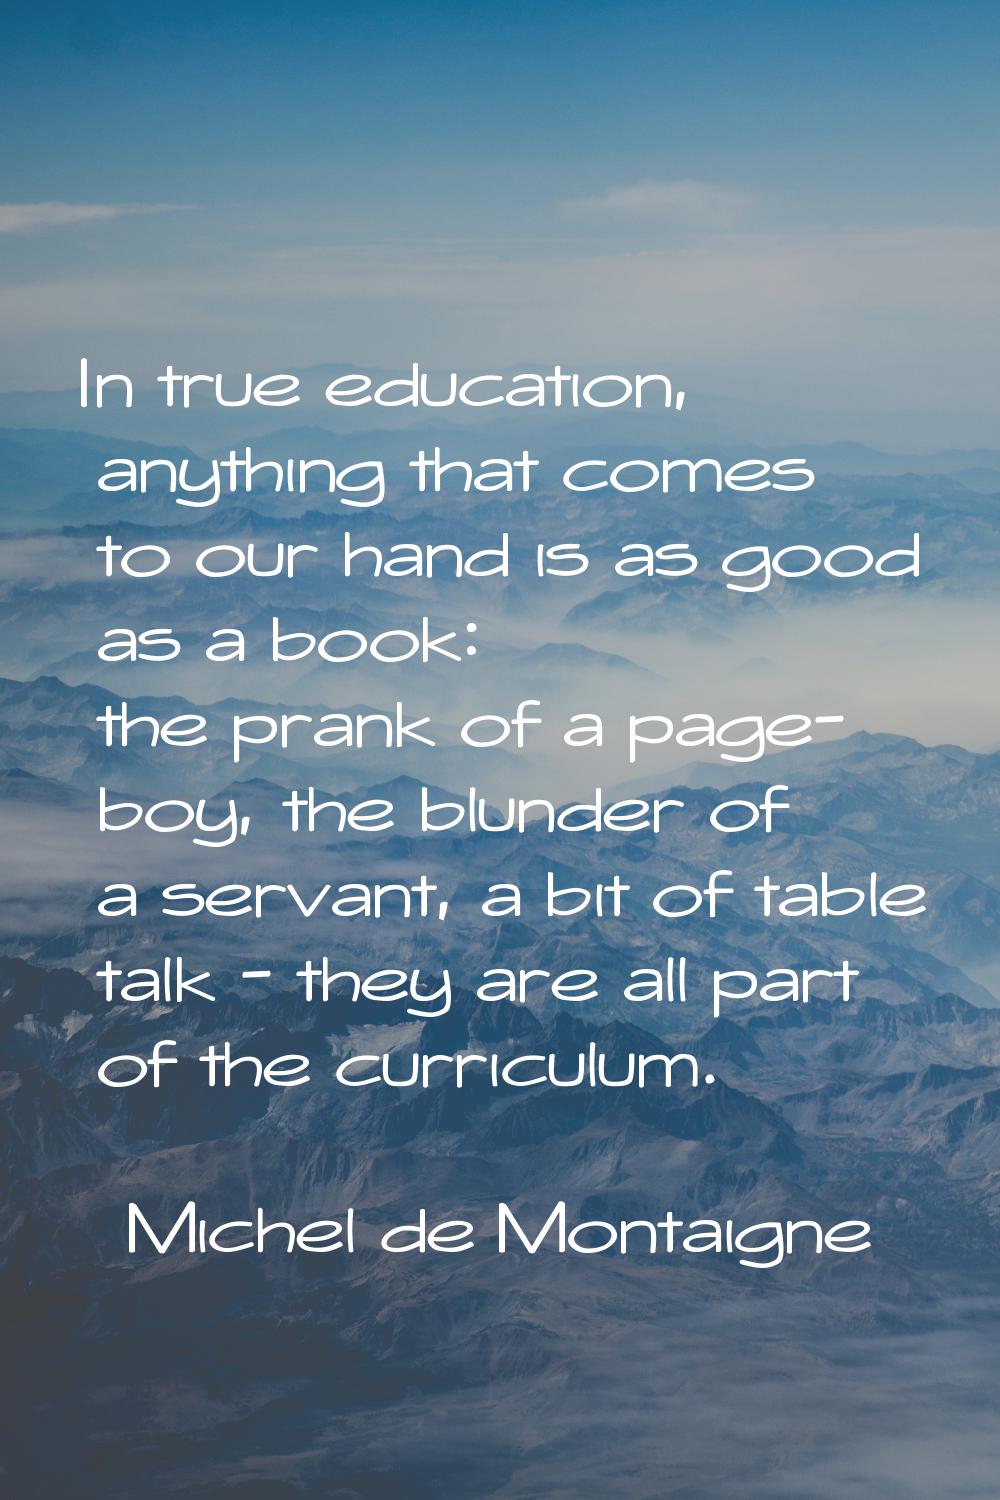 In true education, anything that comes to our hand is as good as a book: the prank of a page- boy, 